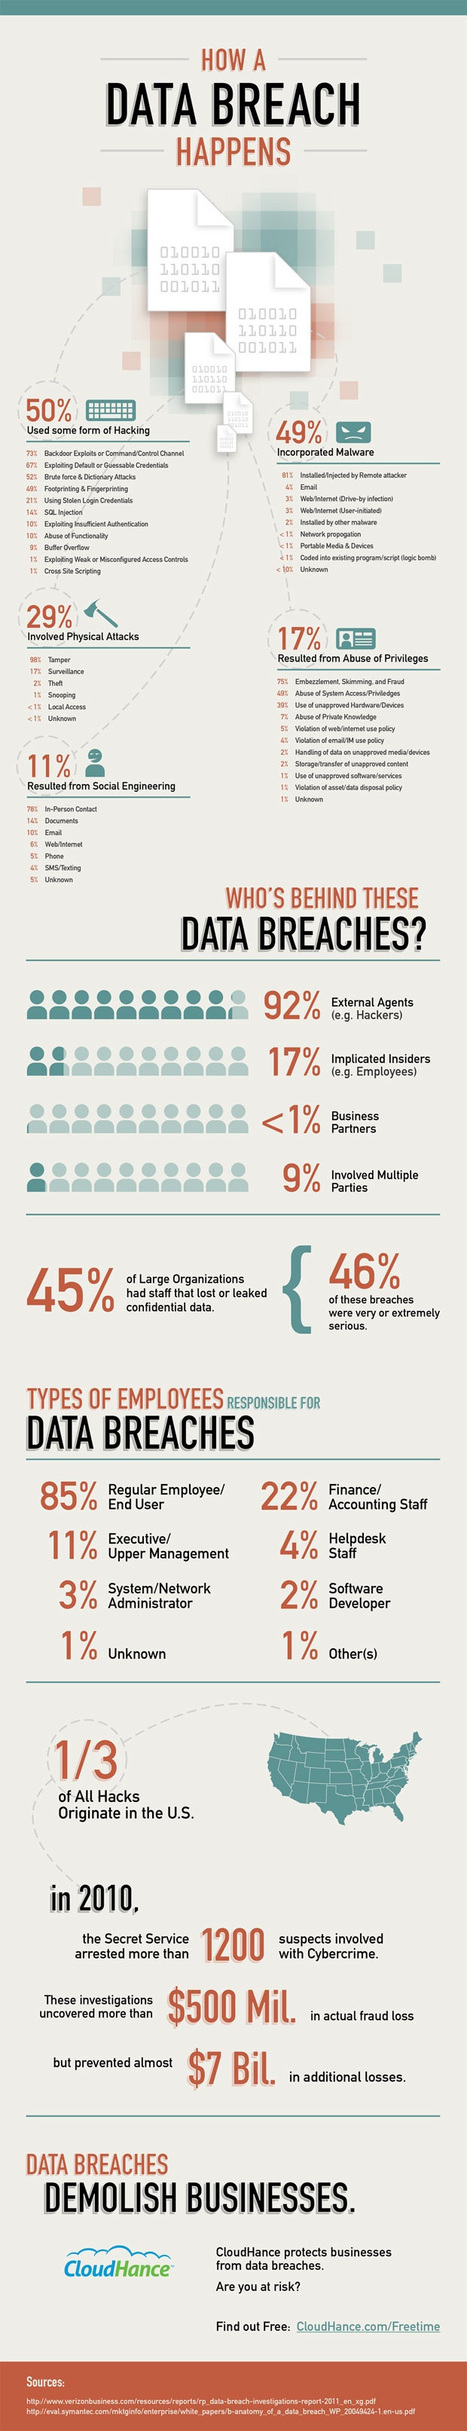 INFOGRAPHIC: How A Data Breach Happens | Didactics and Technology in Education | Scoop.it